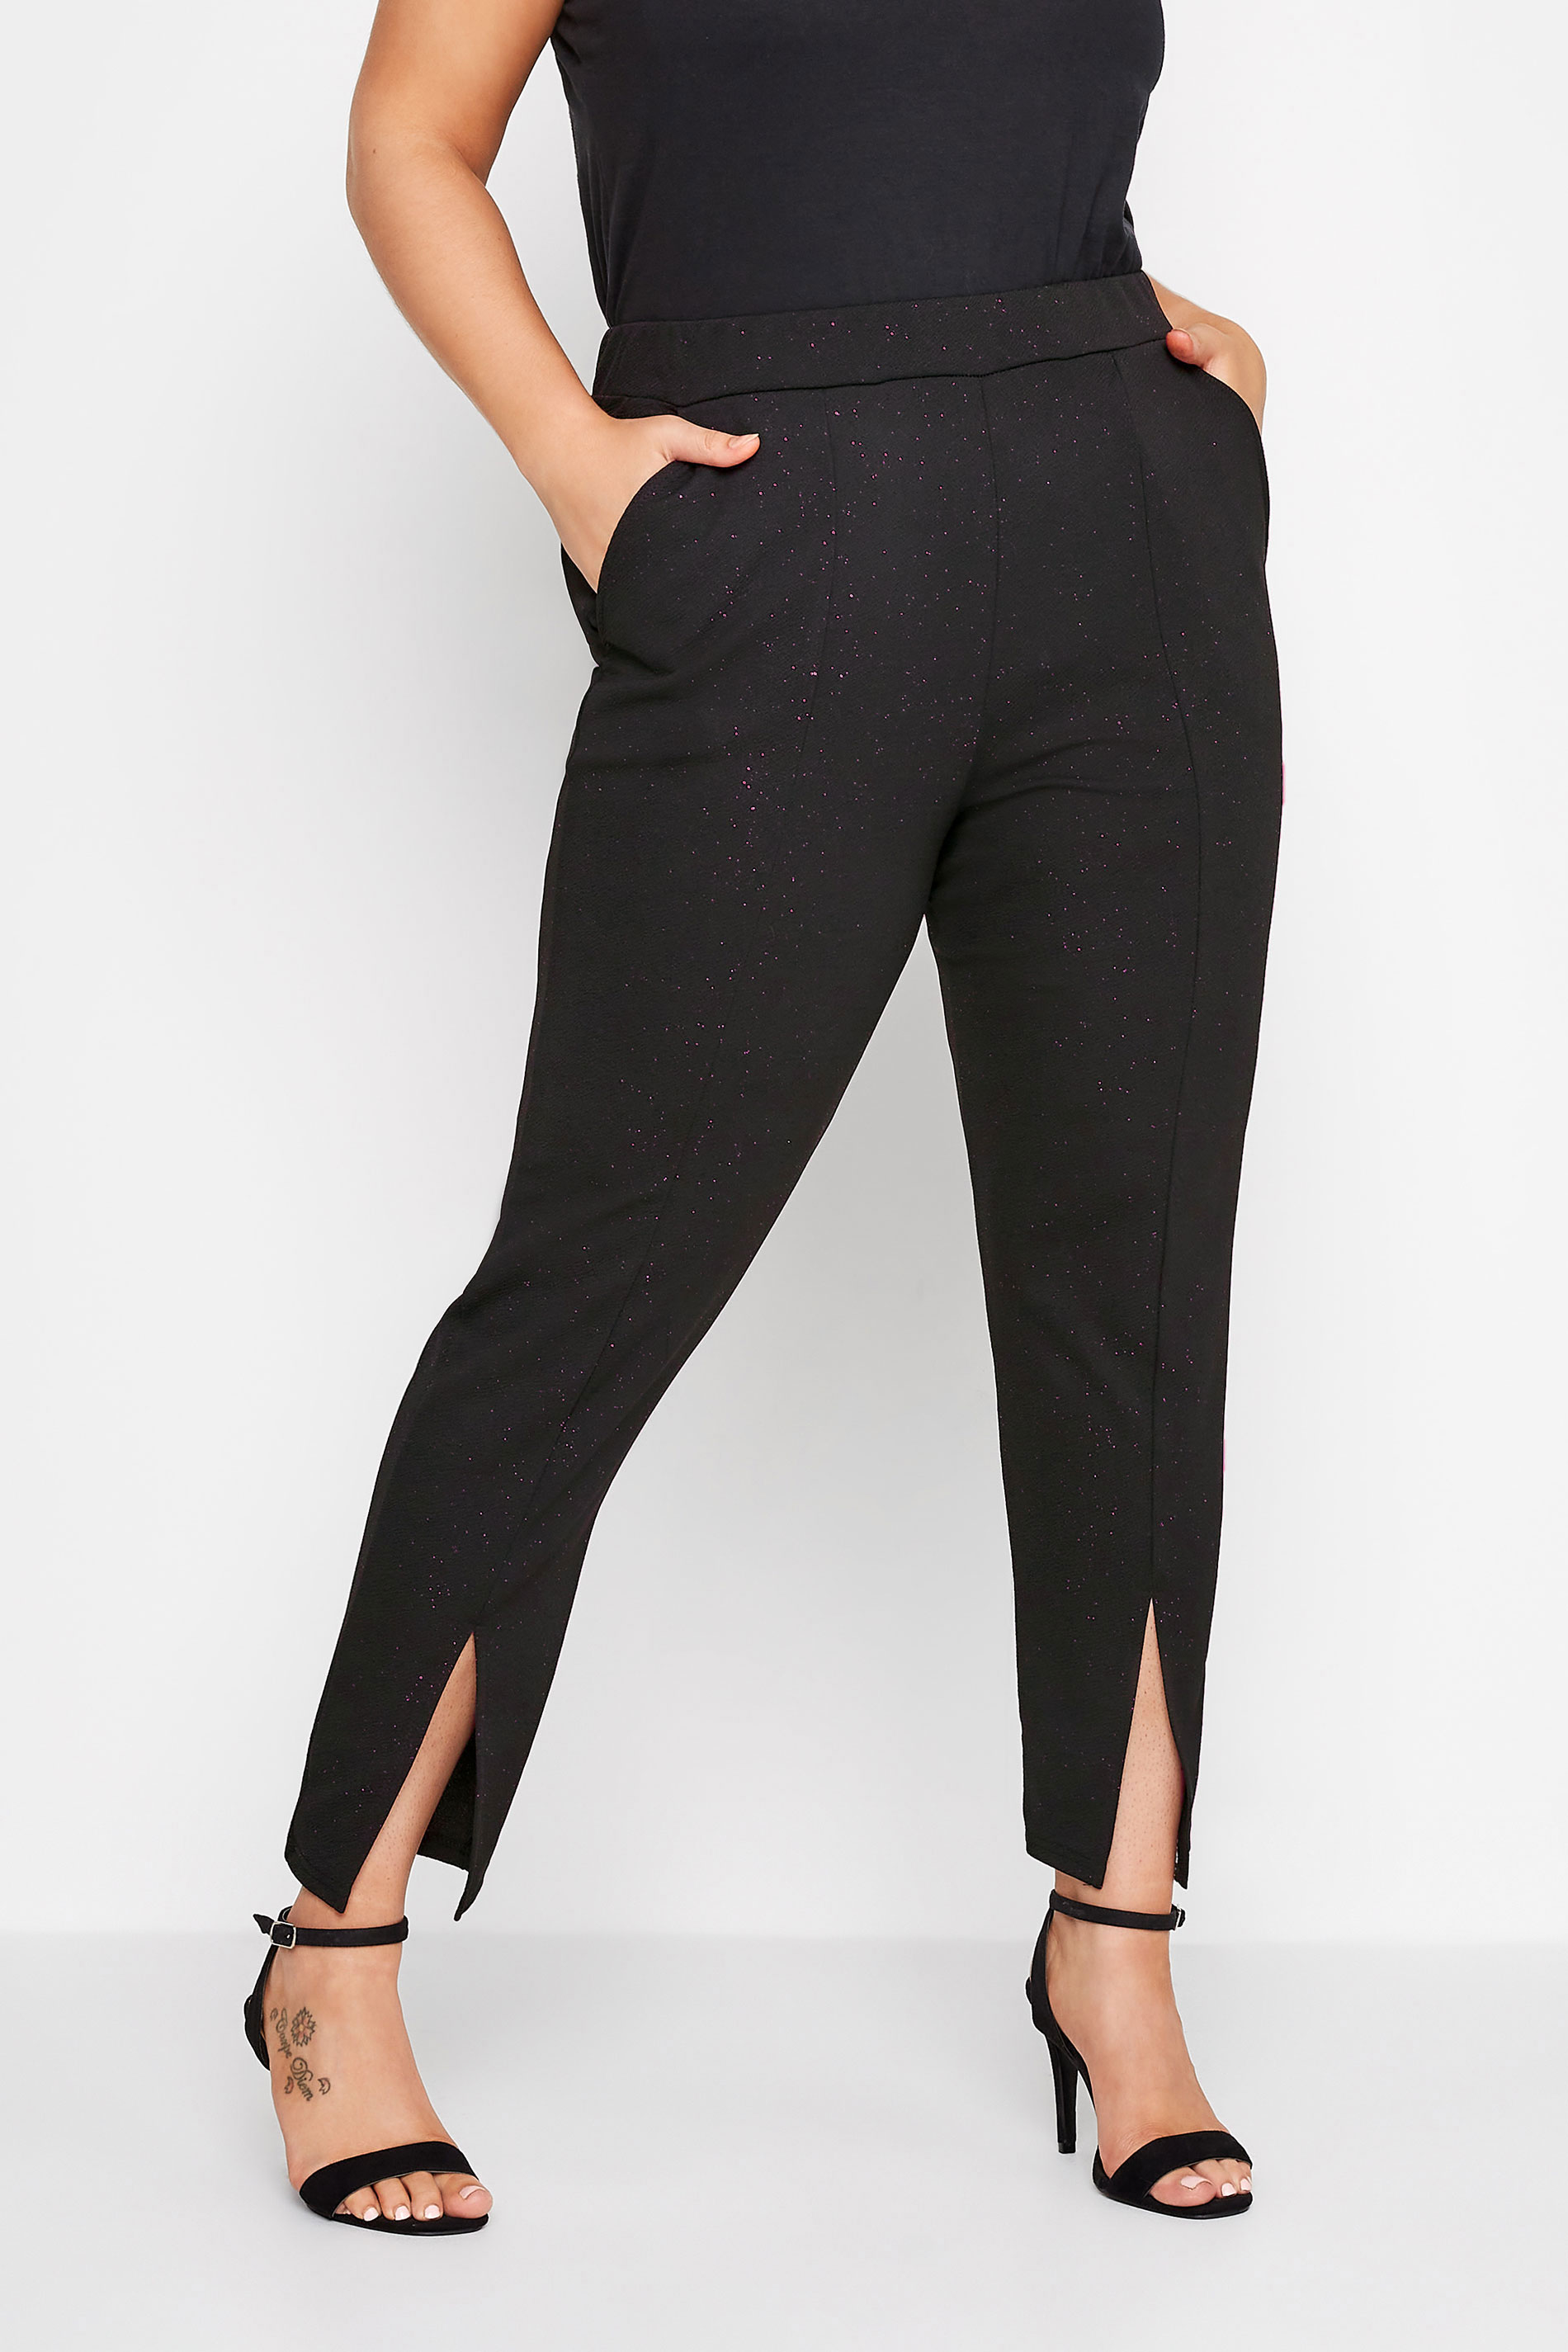 Plus Black Woven Buckle Detailed Tapered Trouser  PrettyLittleThing